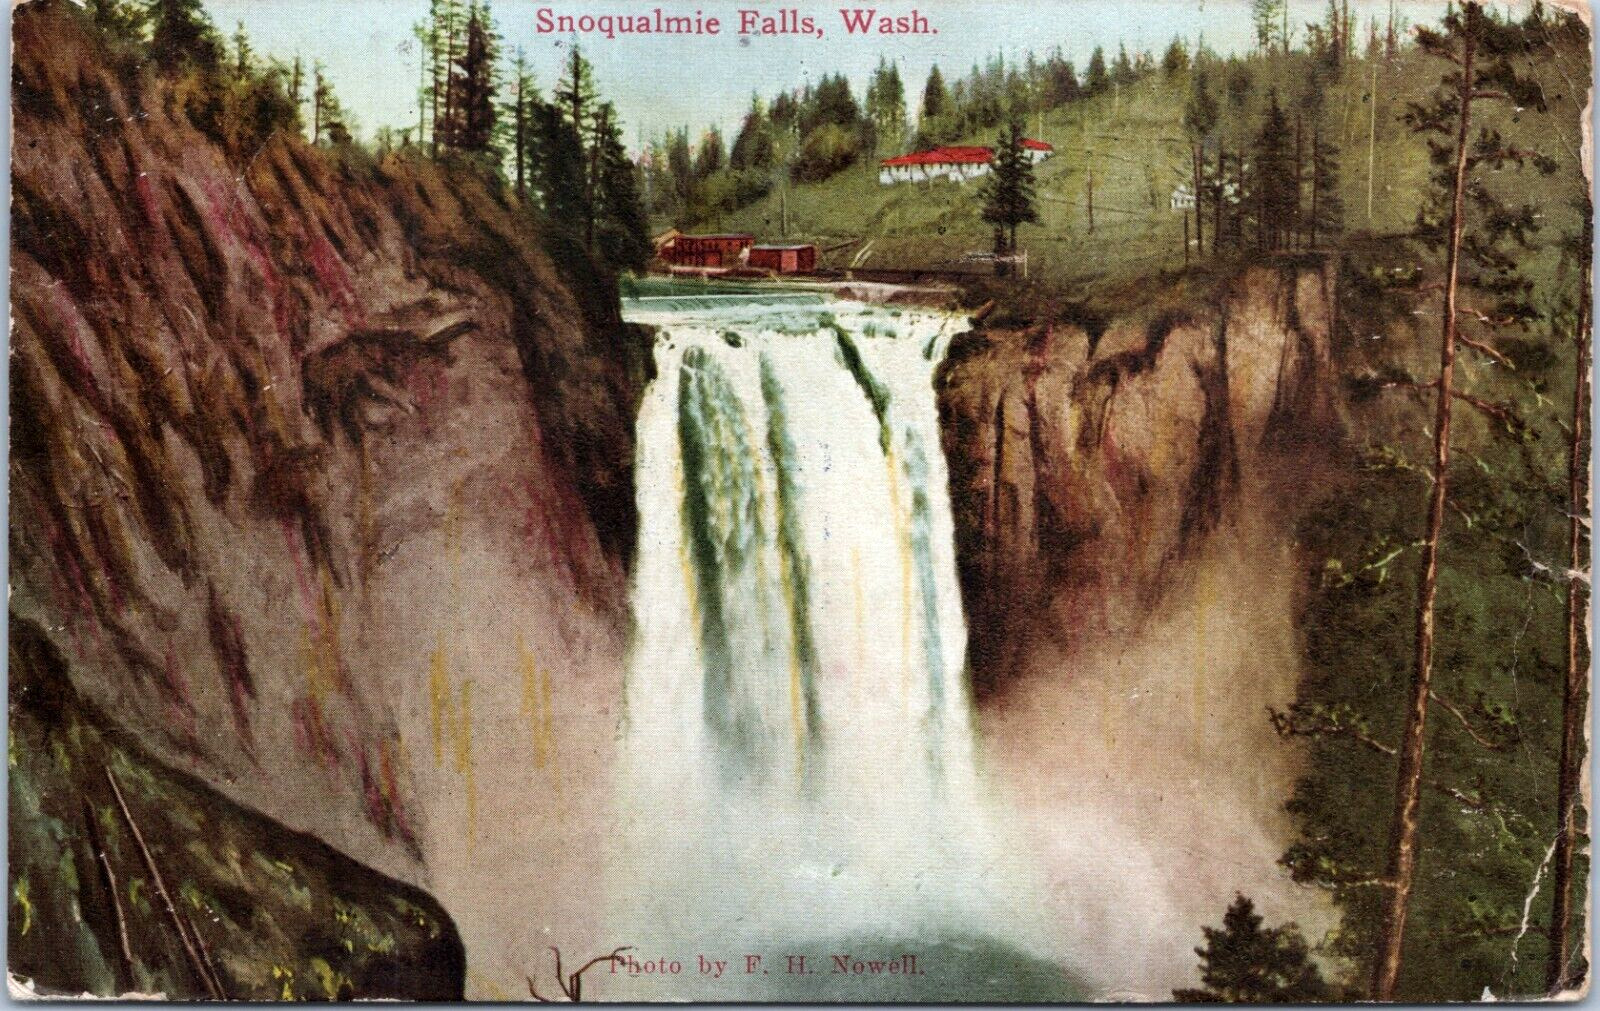 Snoqualmie Falls WA Hydroelectric Power Plant 1912 Athens Railway & Electric Co.